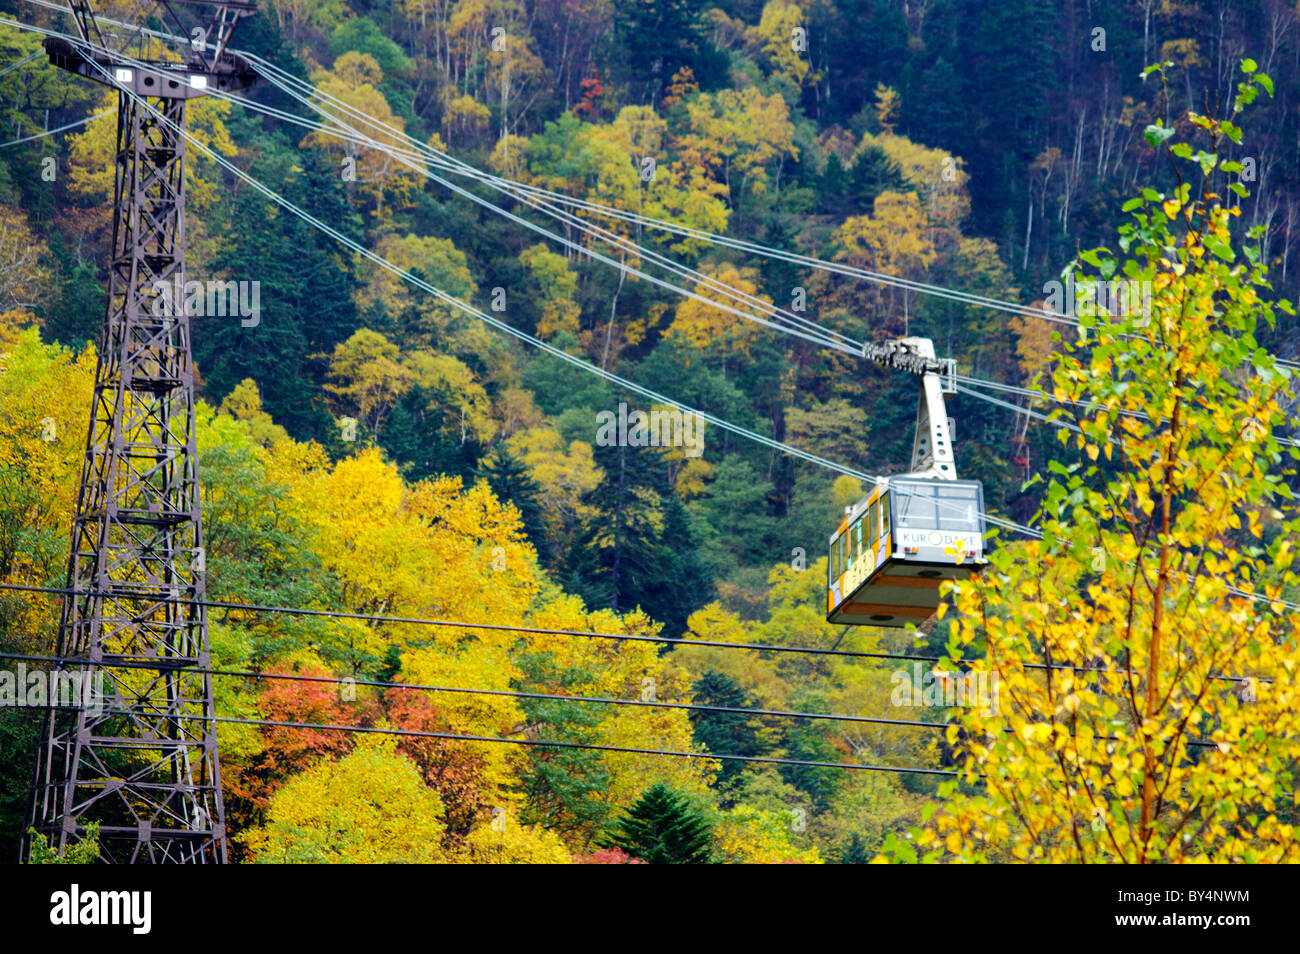 Overhead Cable Car in Autumn Stock Photo